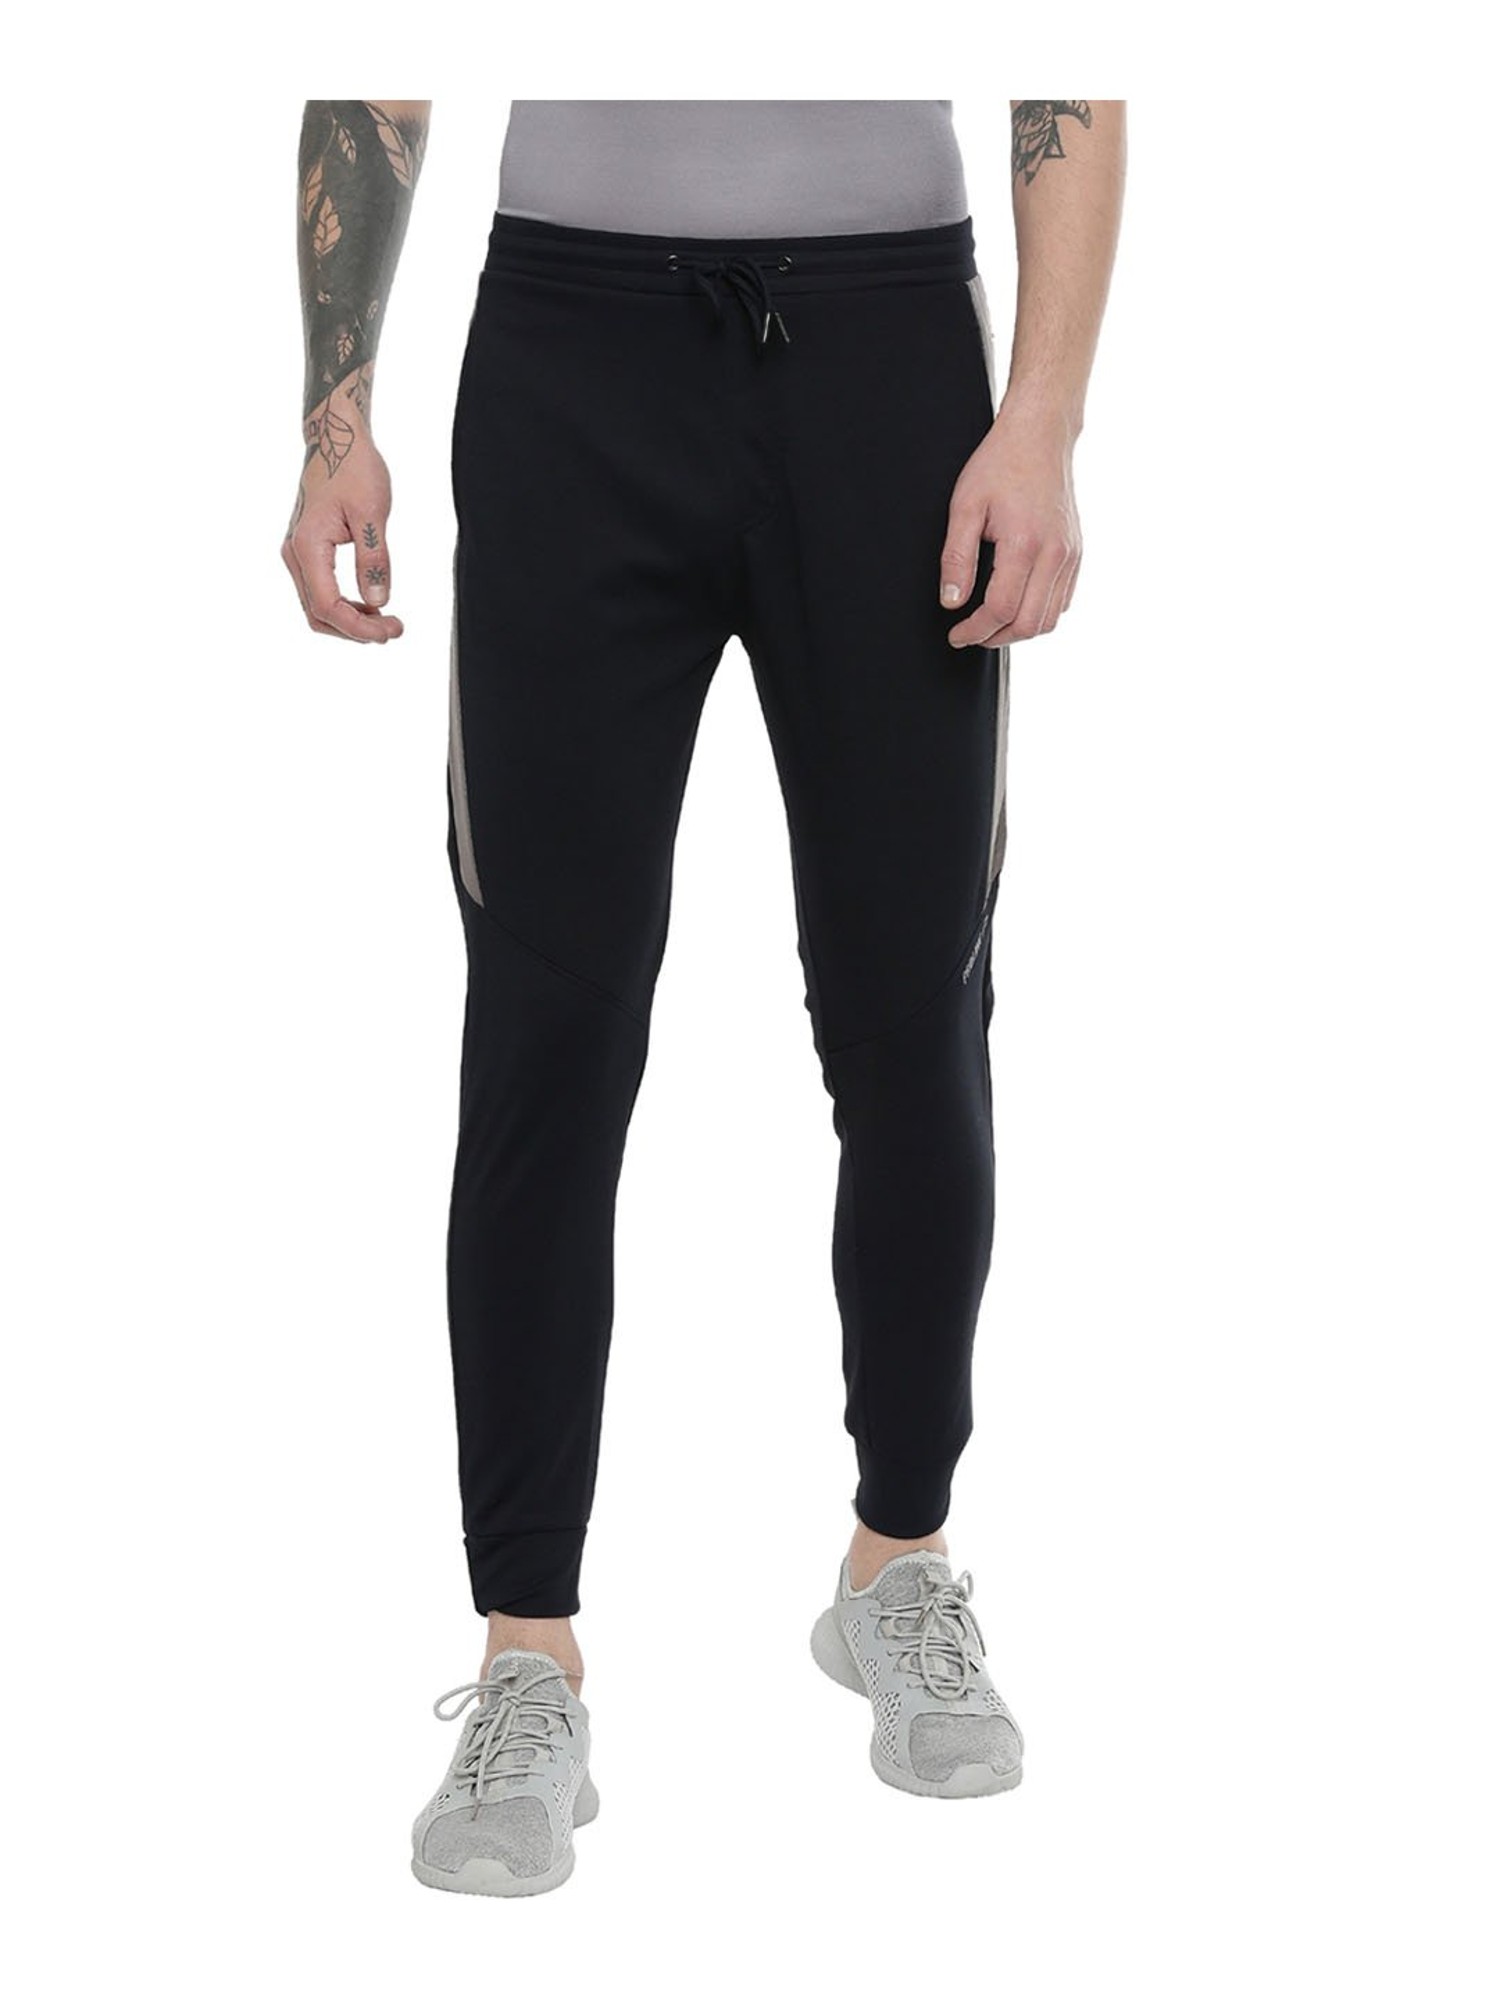 Best Proline Cotton Polyester Track Pant Action Casual for Men Review -  YouTube